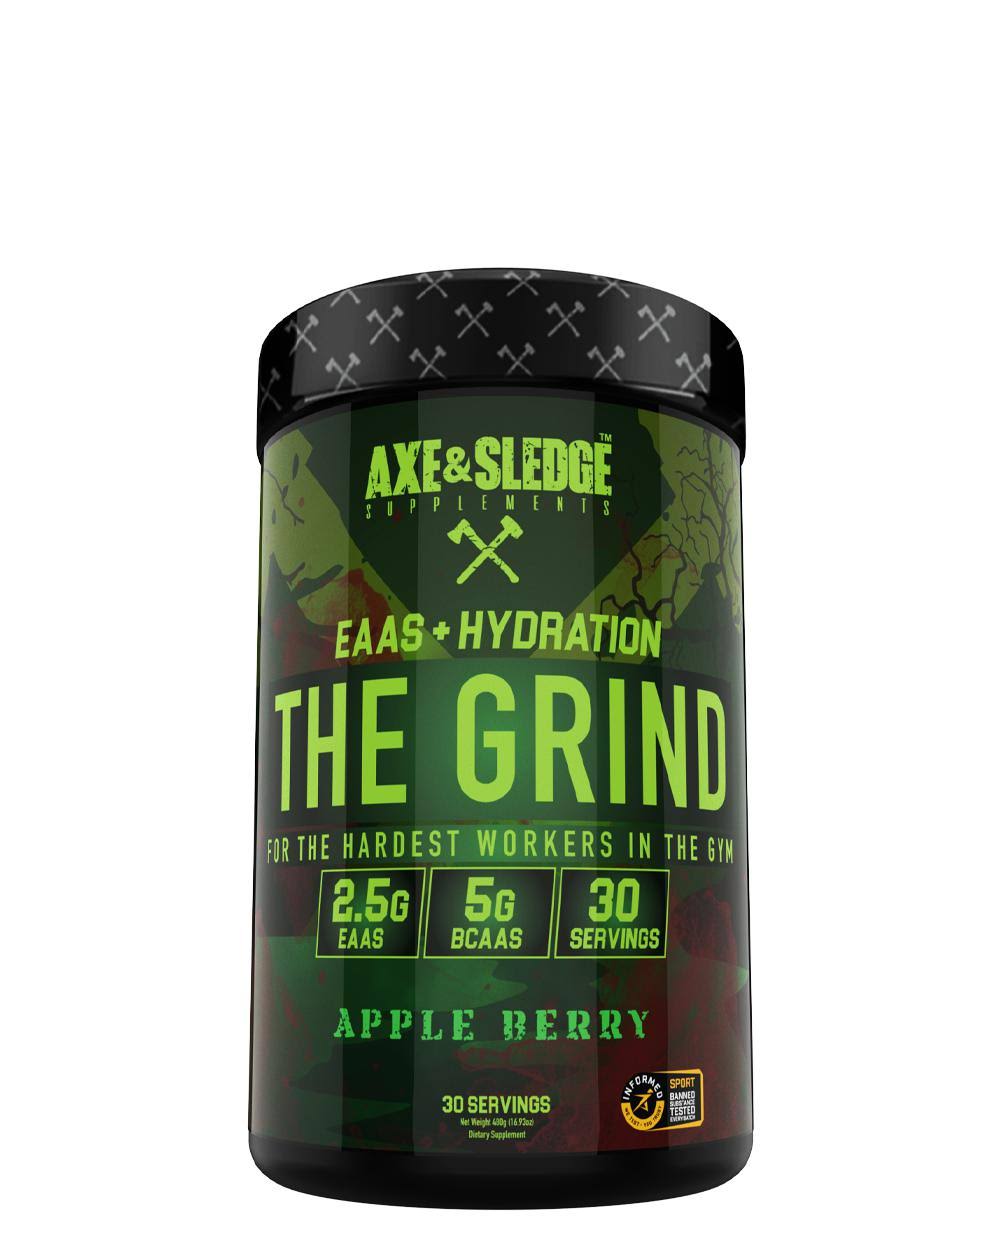 Axe & Sledge The Grind (30 Servings) Apple Berry